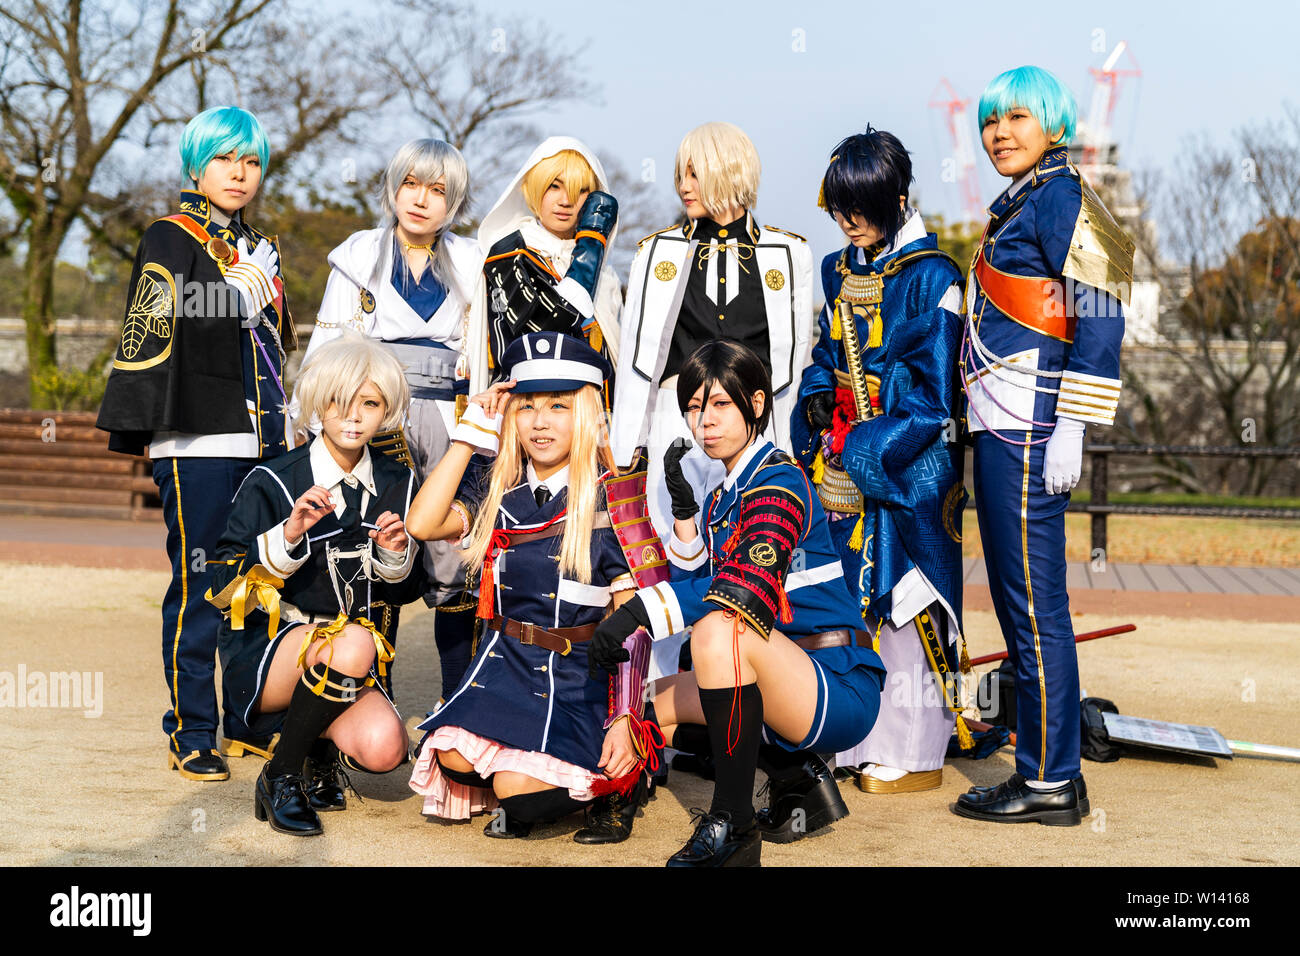 Japanese cos play event at Kumamoto Castle Park. Group of costume woman players in Science fiction type uniforms gathered together for a group shot. Stock Photo